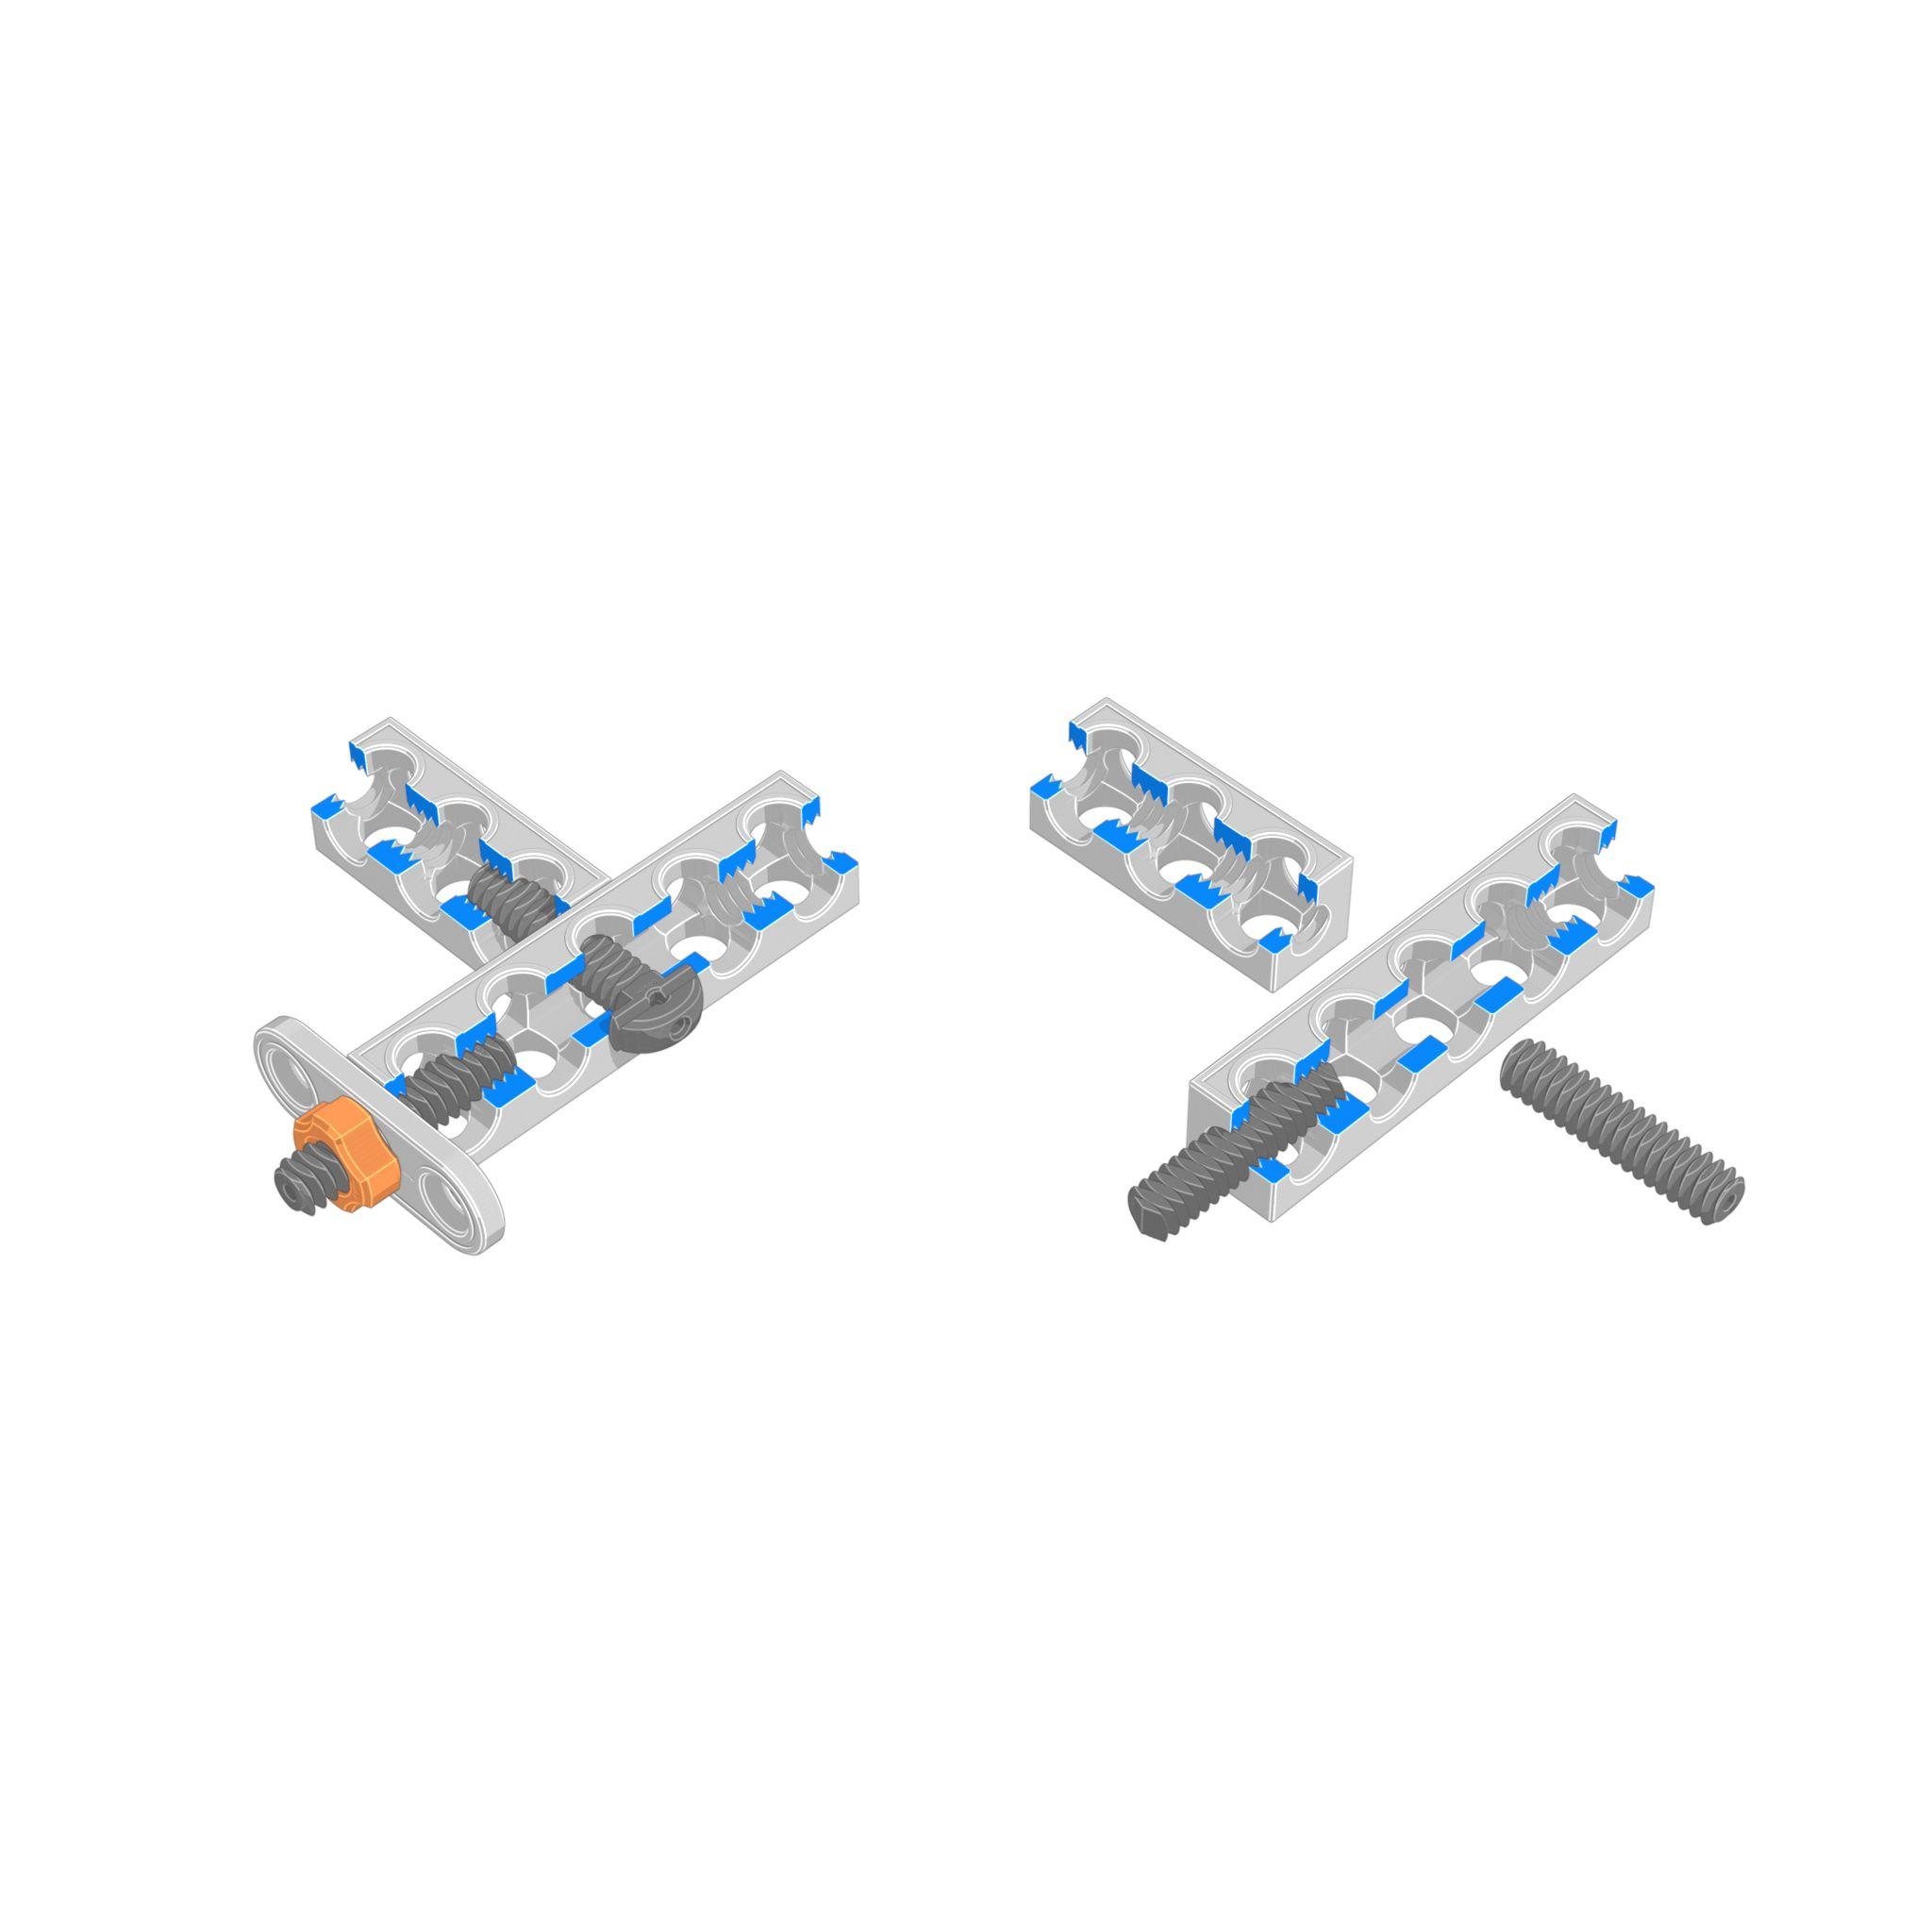 STEMFIE - Beams - Straight - Standard - Square Threaded Ends - Double-Ended 3d model